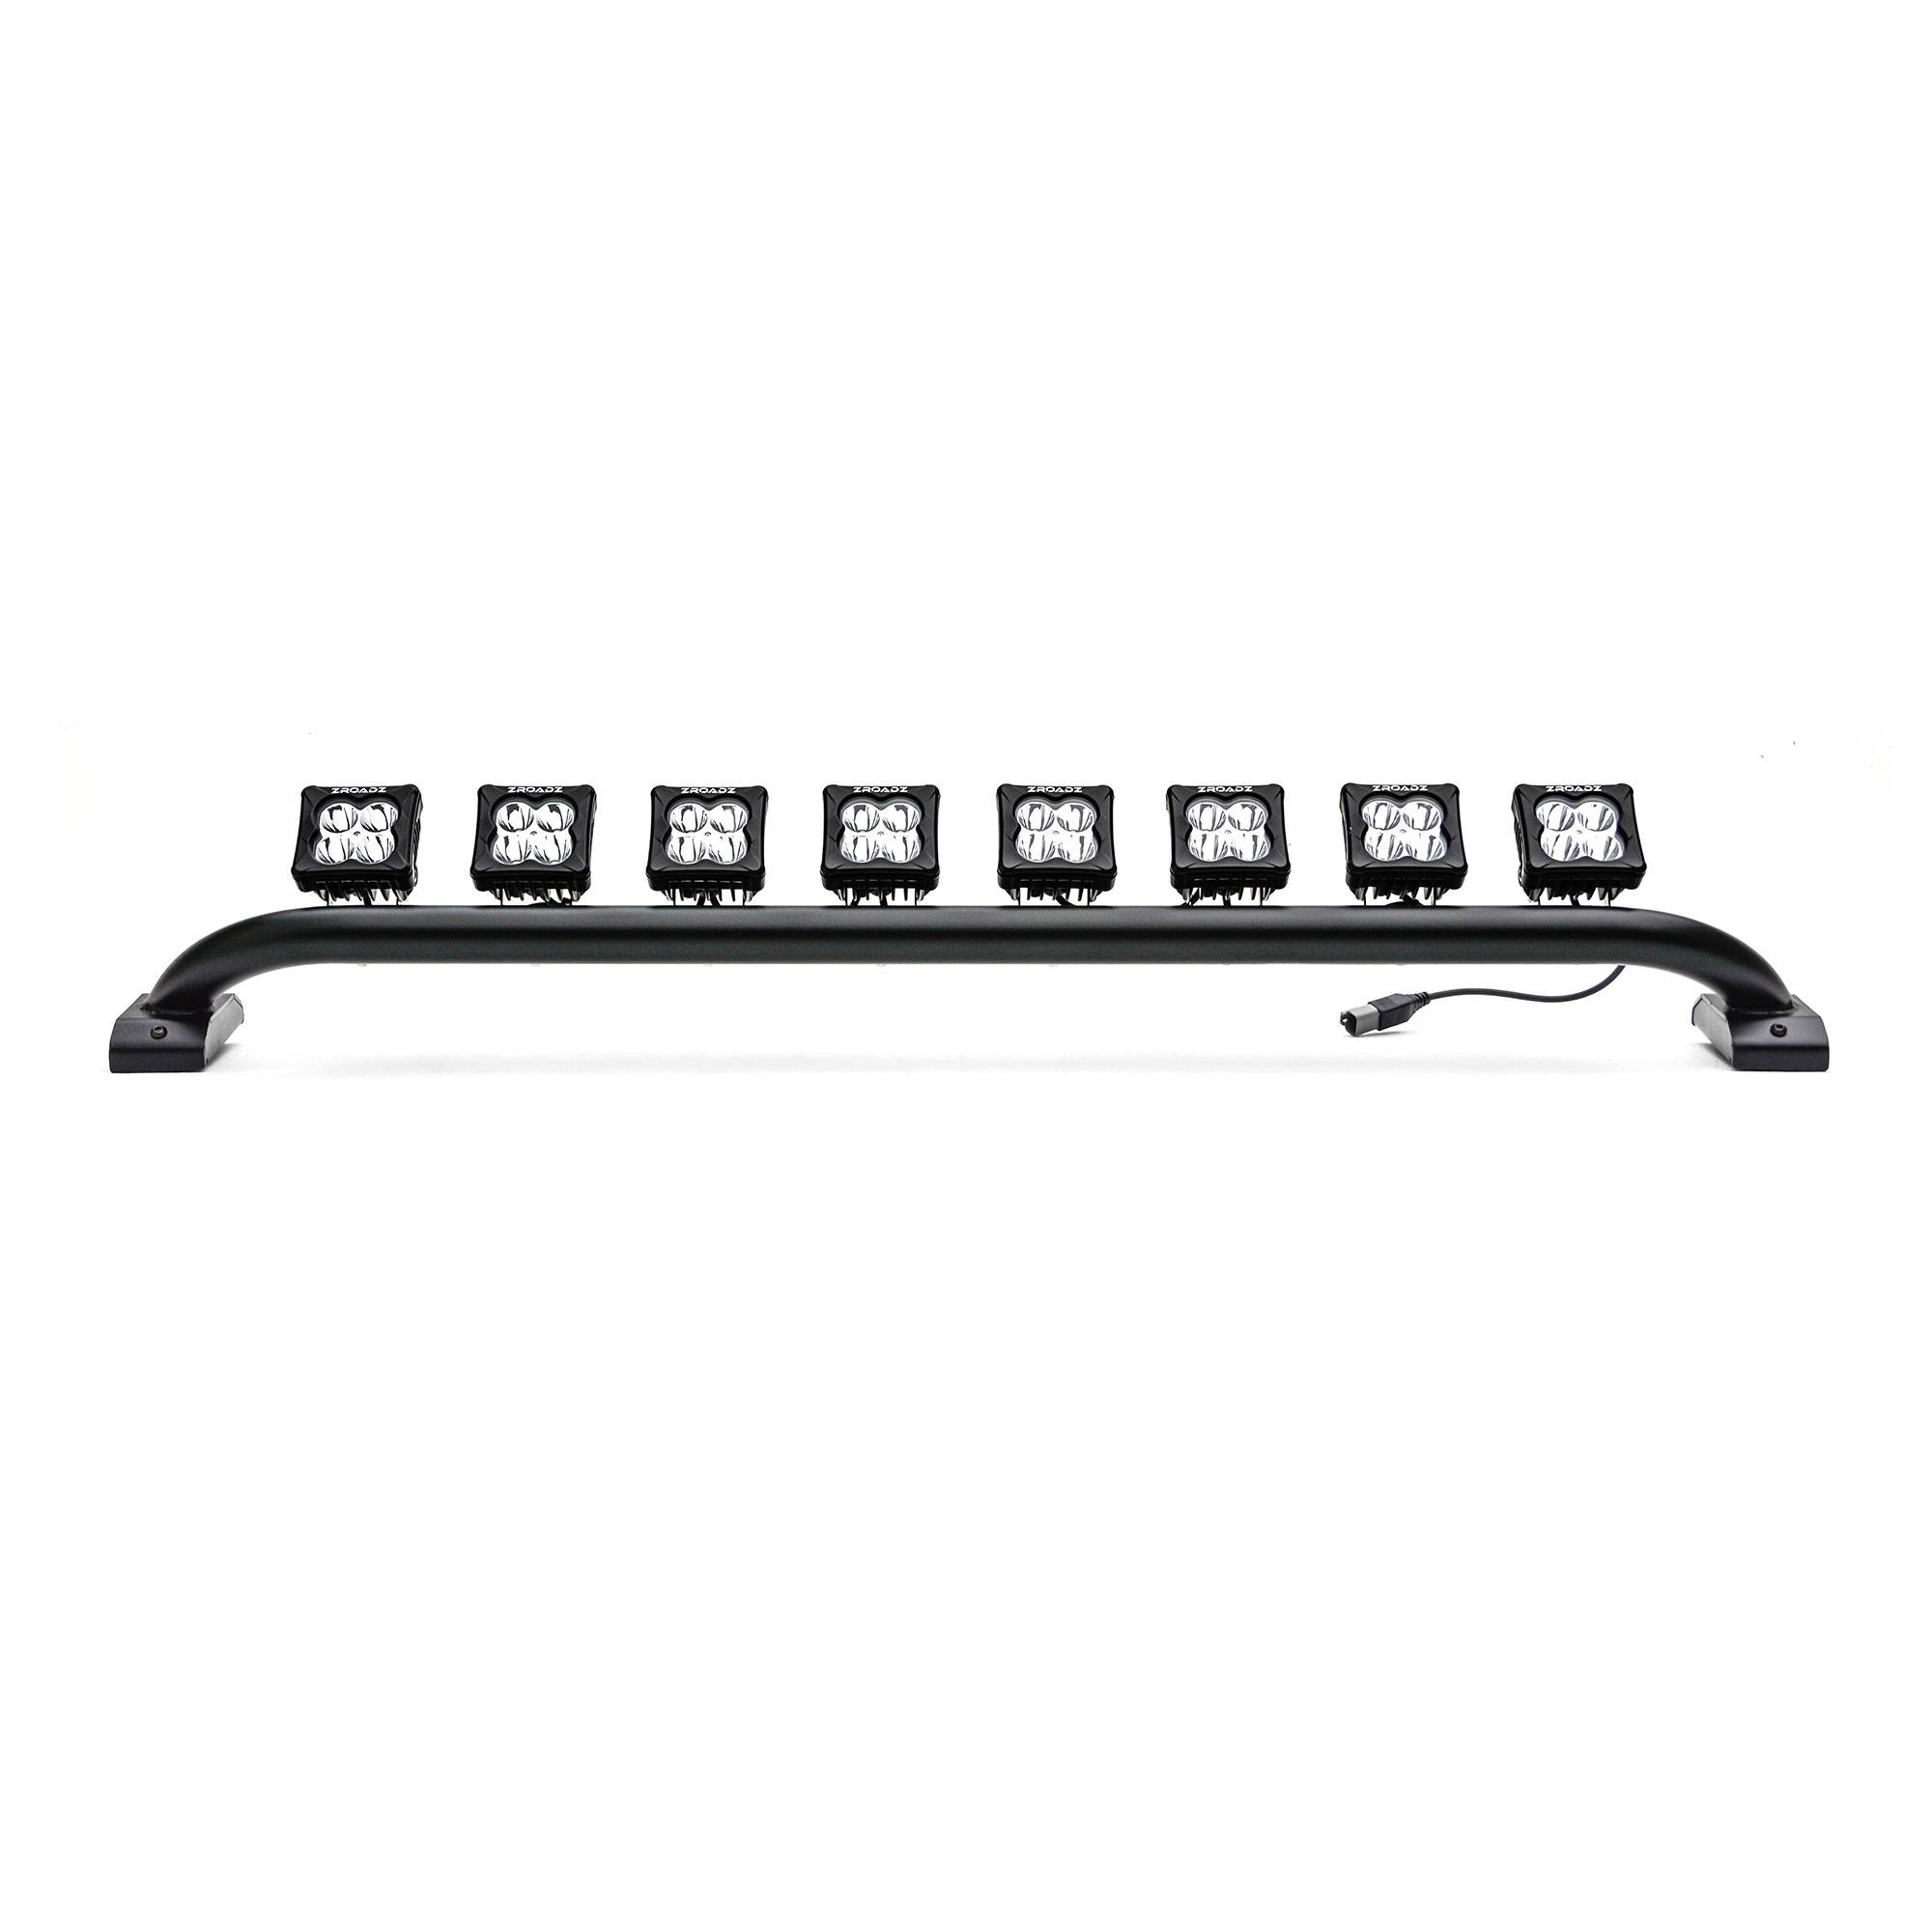 2021-2023 Ford Bronco Front Roof Multiple LED Pods KIT, Tubular Mounting  Bar with (8) 3 Inch White Pods and Wiring Harness - Part # Z935401-KIT